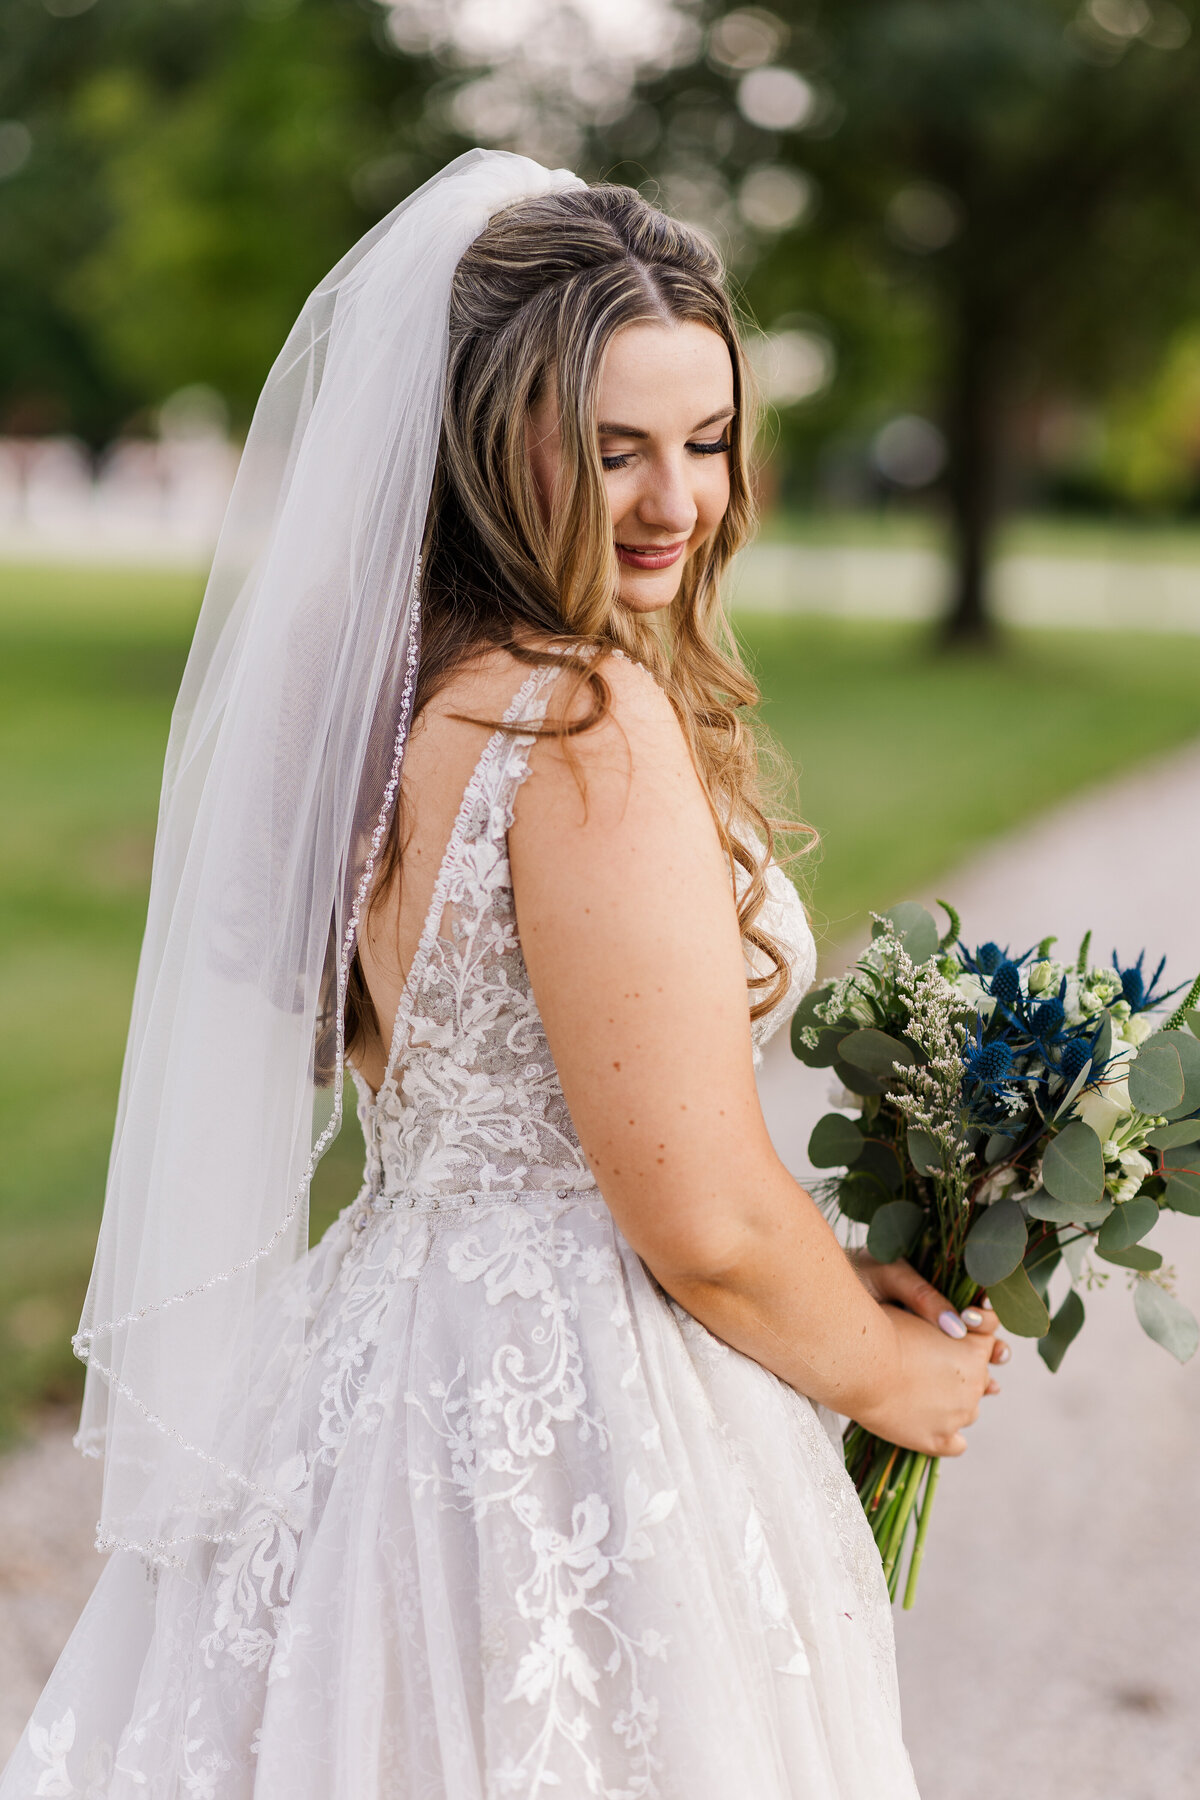 Portrait of a bride with flowers in Cincinnati, OH by Megan Pryll Photography